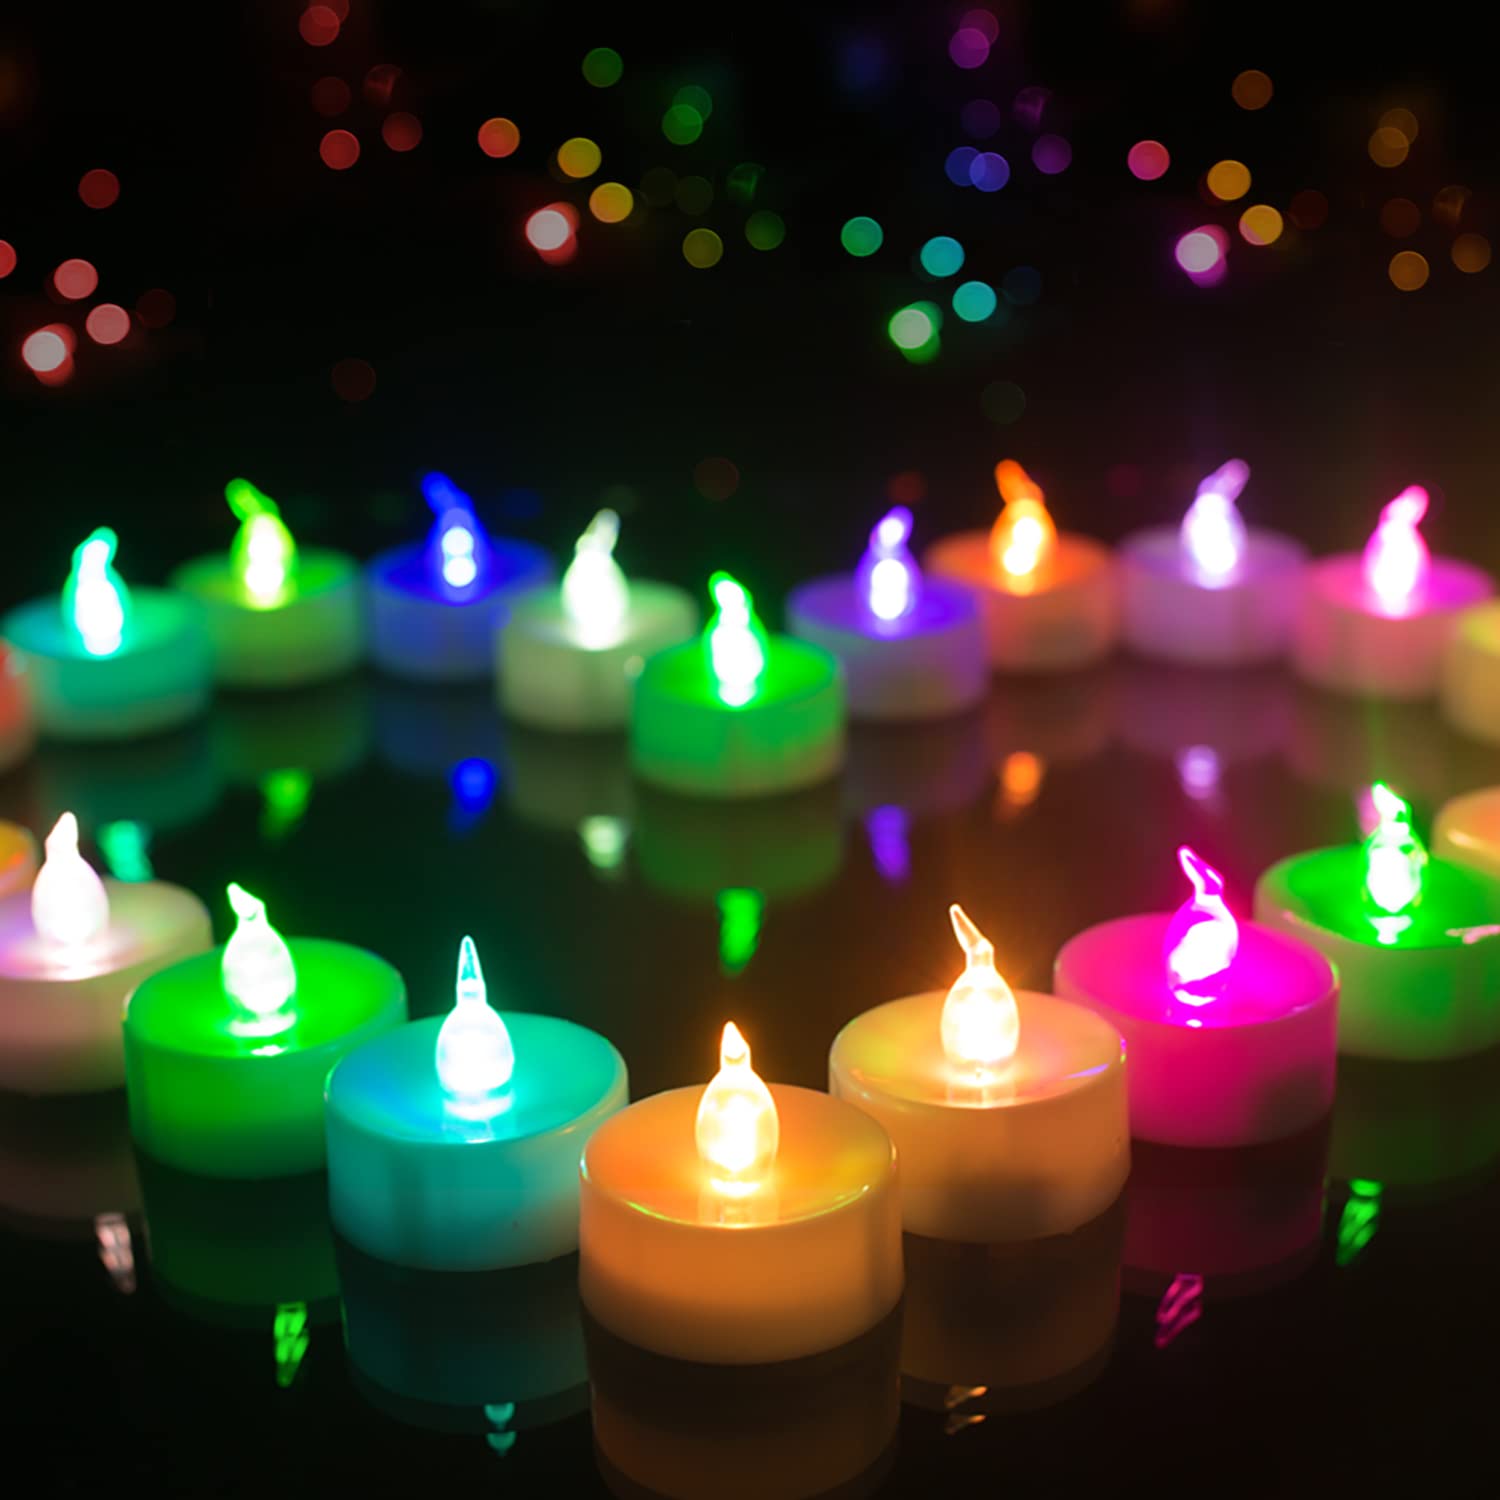 Homemory 24 Pack Colour Changing LED Tea Lights, Flameless Tealight Candles with Rainbow Colors, Battery Operated Colored Fake Candles for Wedding, Party and Christmas, White Base No Flickering Light